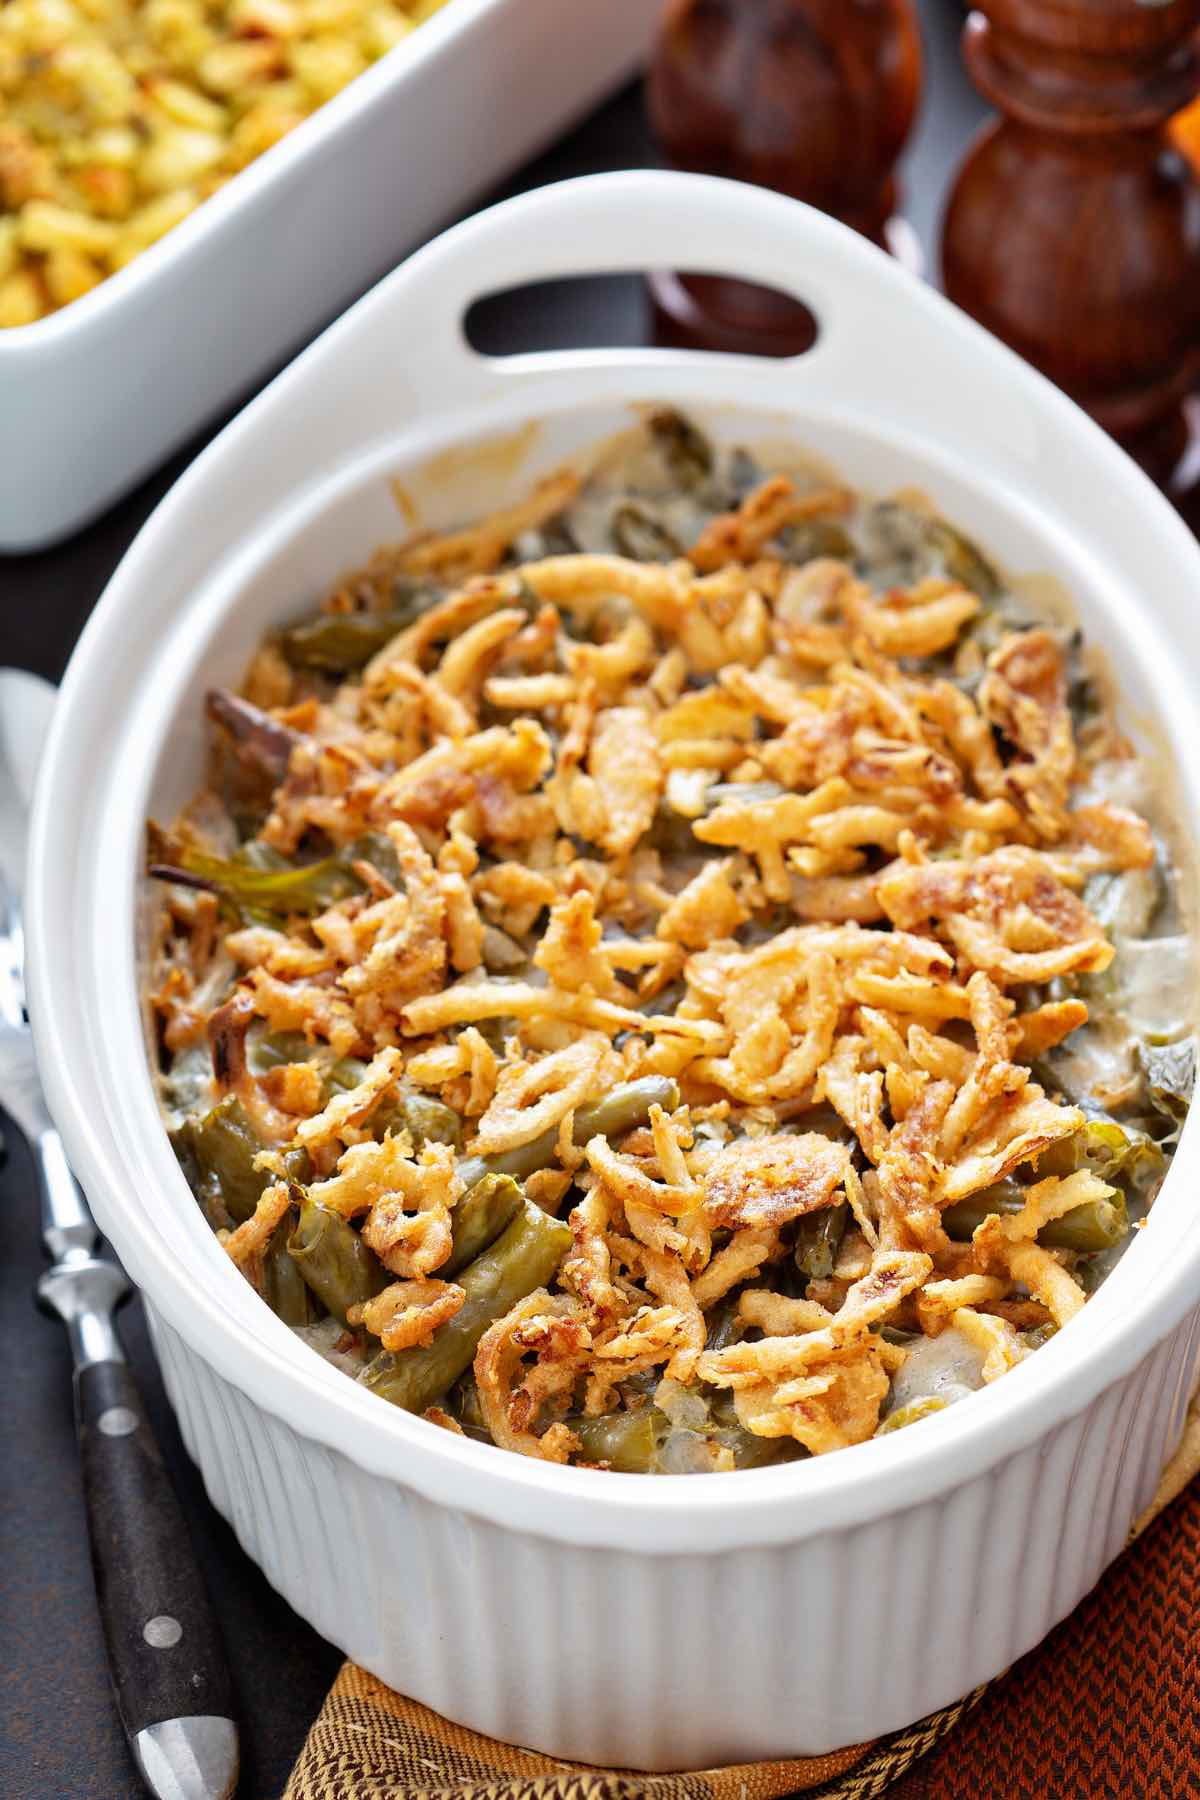 11 Best Canned Green Bean Recipes for Quick and Easy Meals